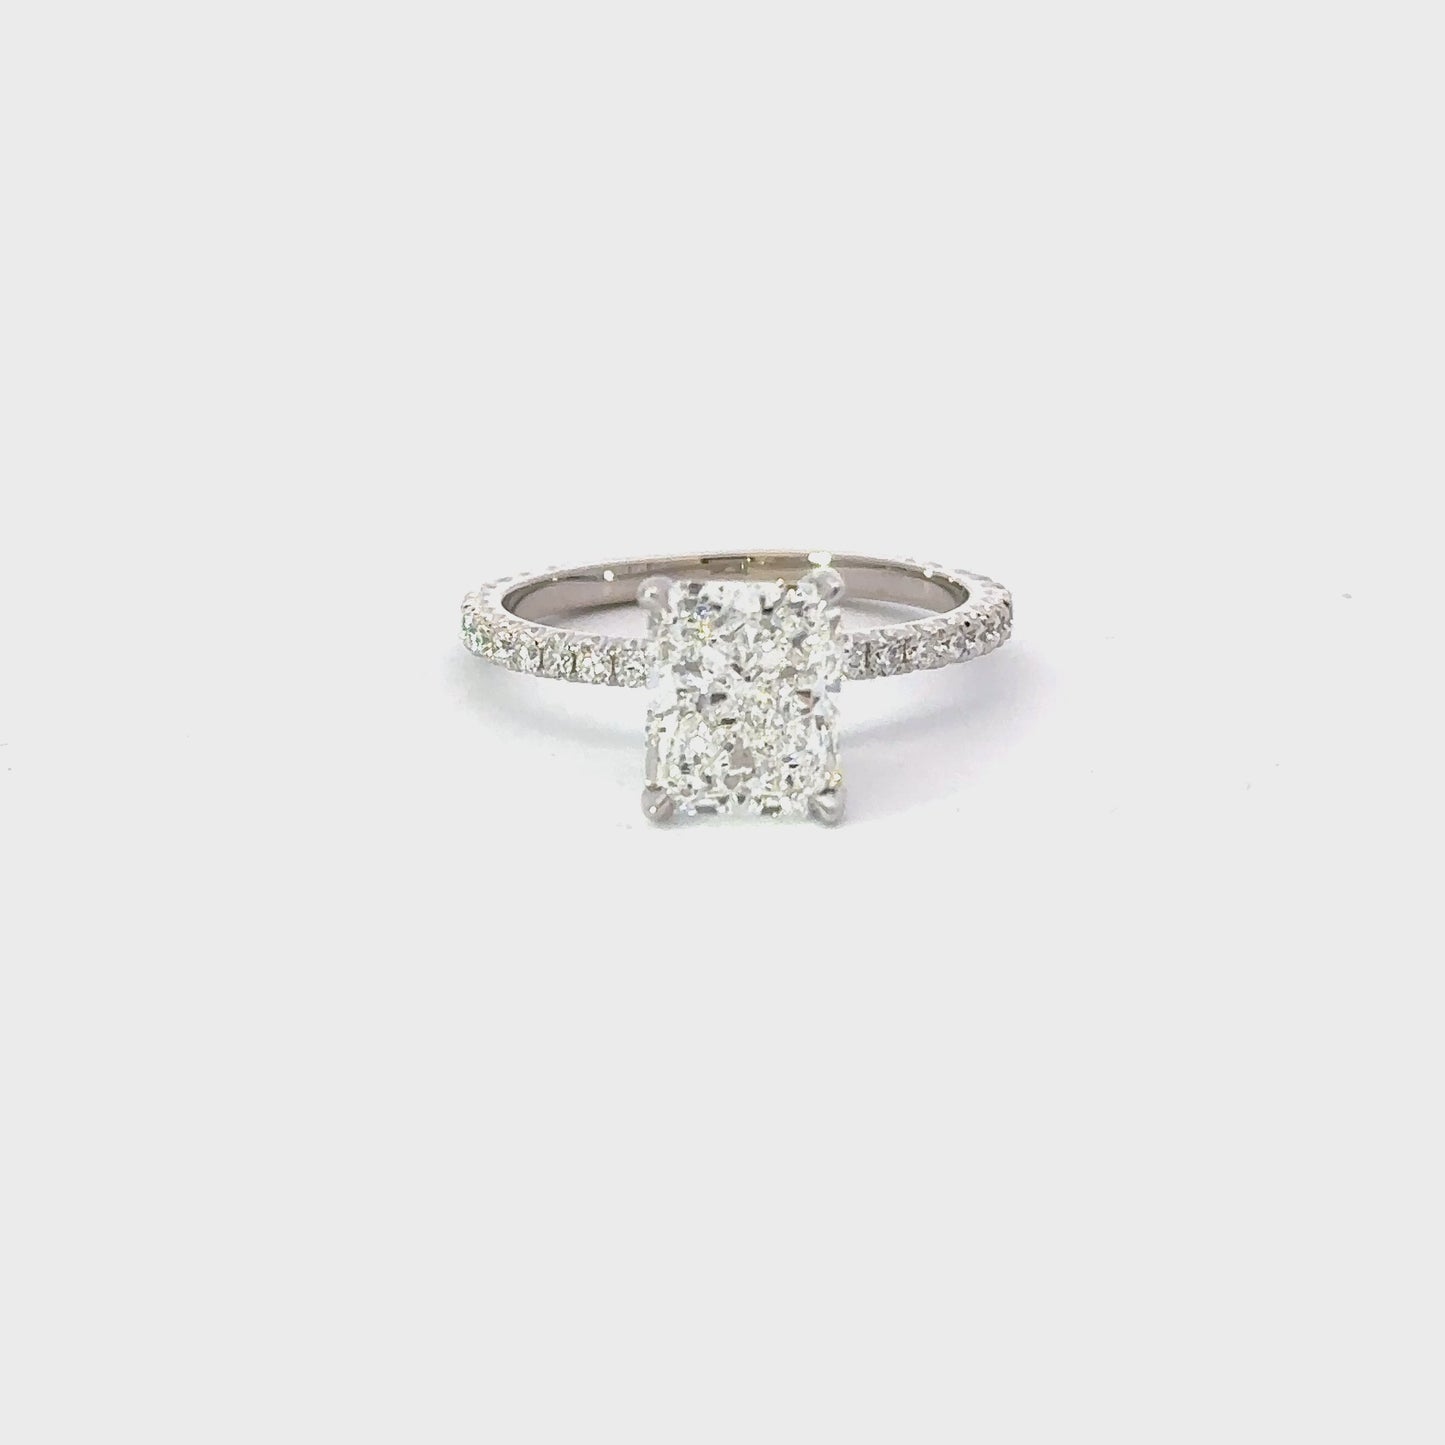 2.51 Carat Radiant Natural Diamond Engagement Ring with Hidden Halo